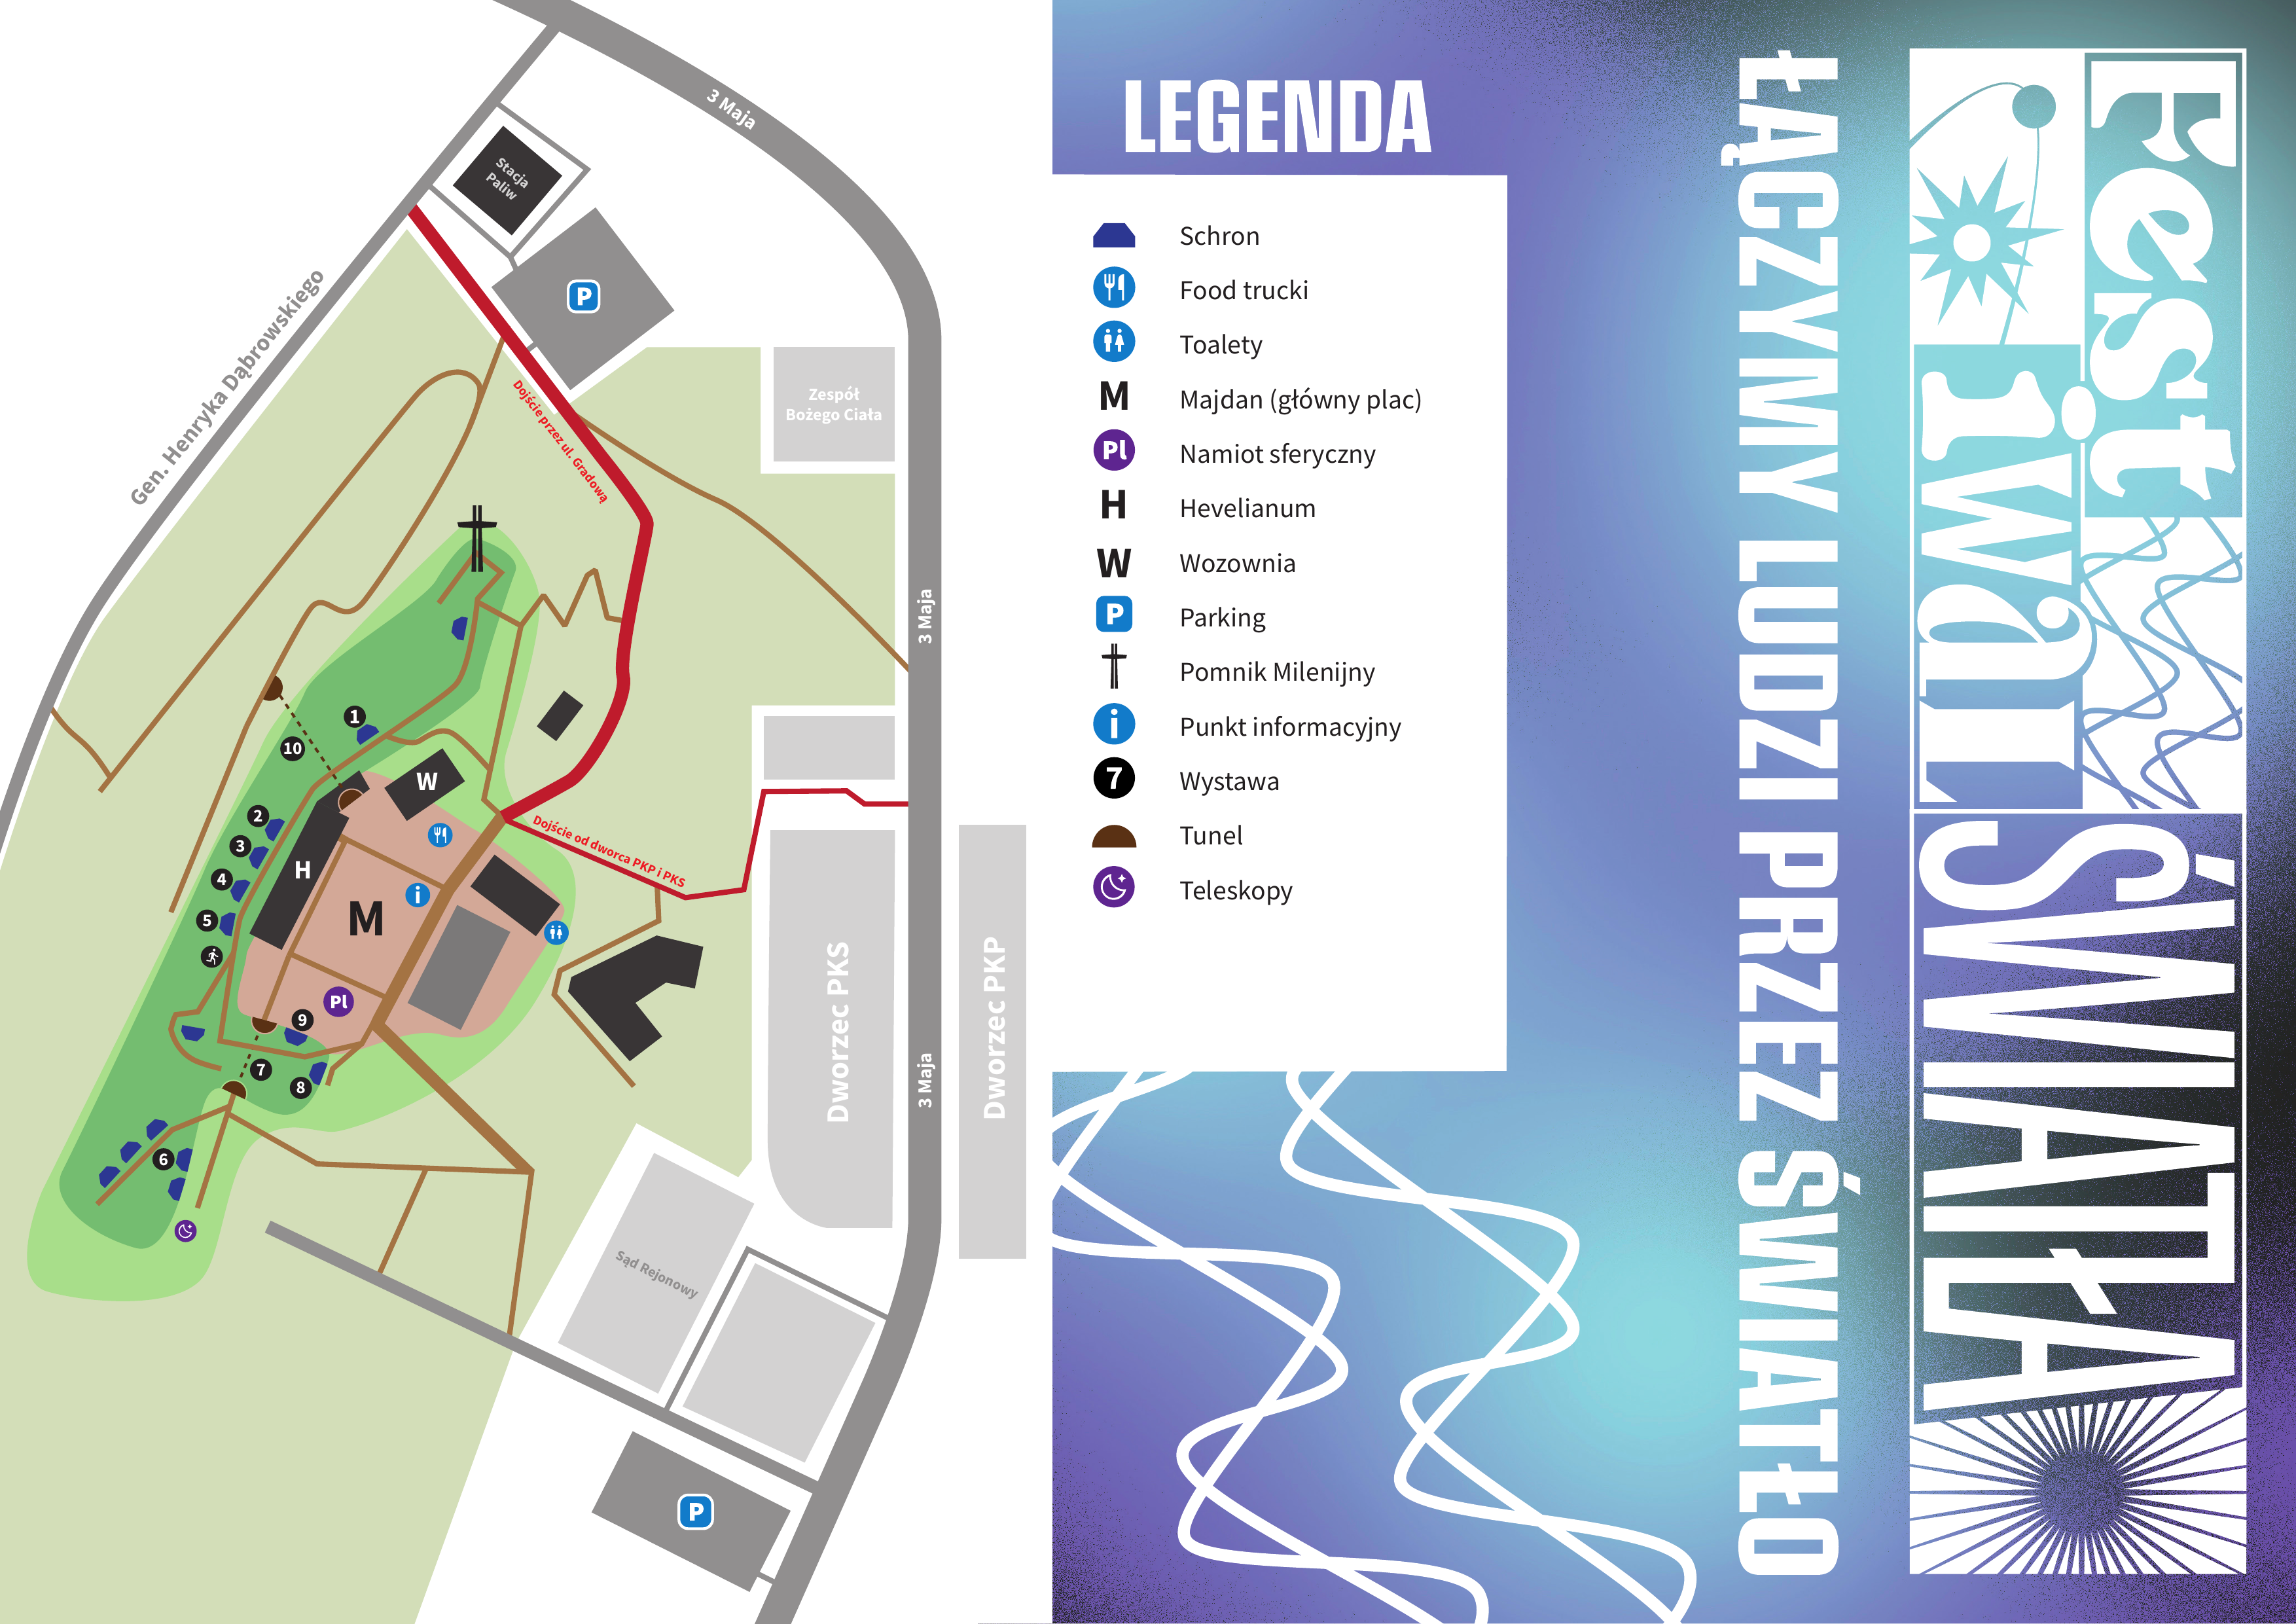 Map of the Festiwal (in PL)